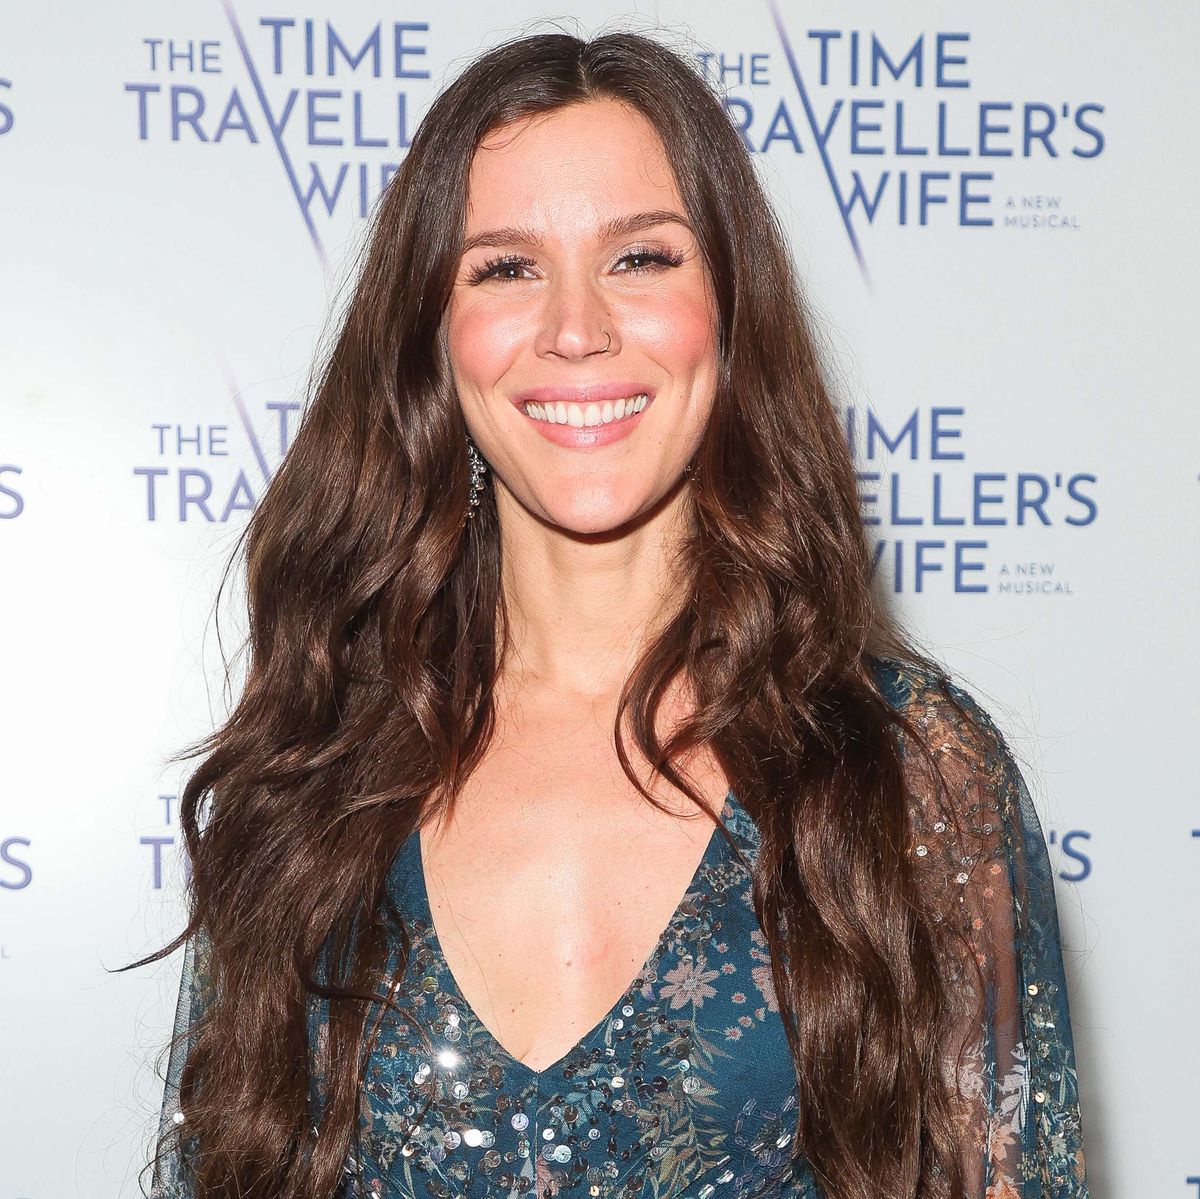 Joss Stone Reveals She's Married to American Musician Cody DaLuz